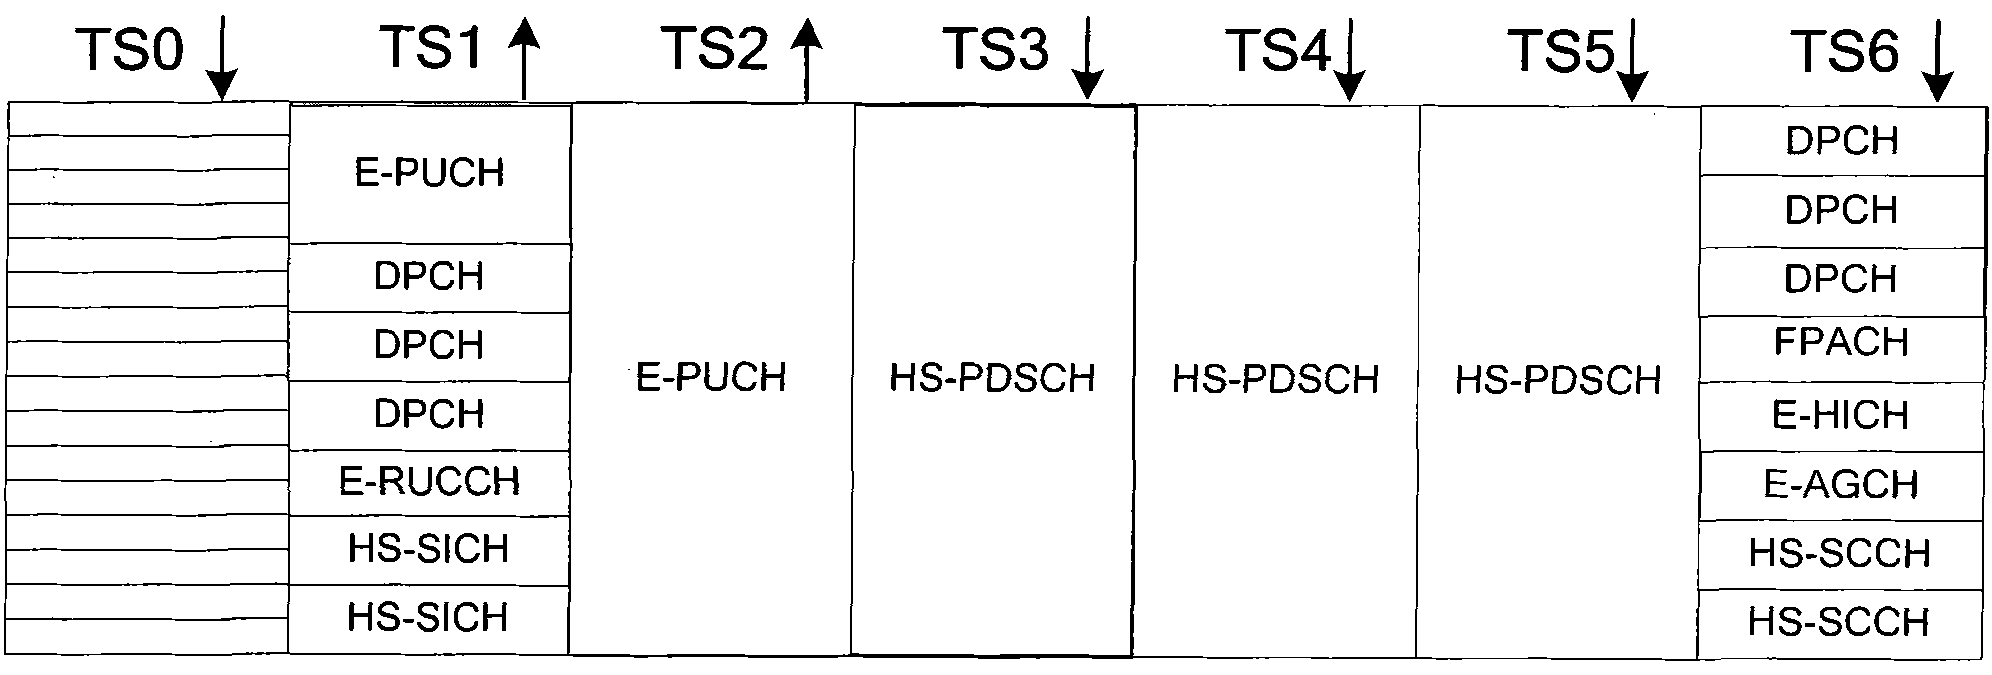 Enhanced high-speed packet access scheduling method and device